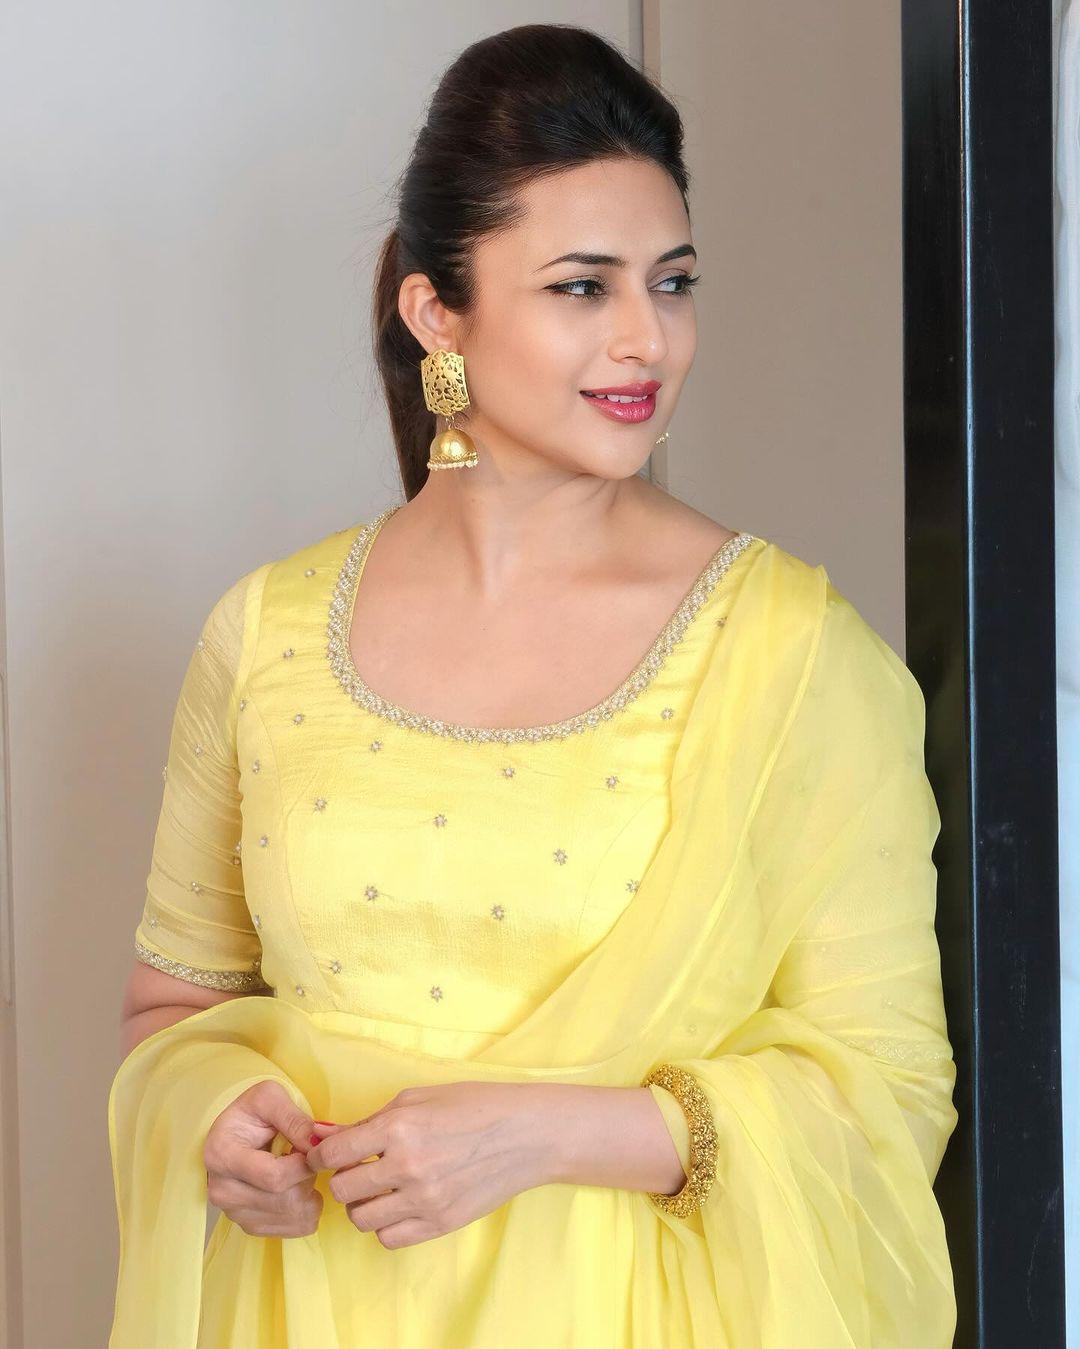 Her impeccable acting and charming personality have made her one of the most adored actresses in the Indian television landscape. Divyanka's on-screen chemistry with co-star Karan Patel is particularly celebrated